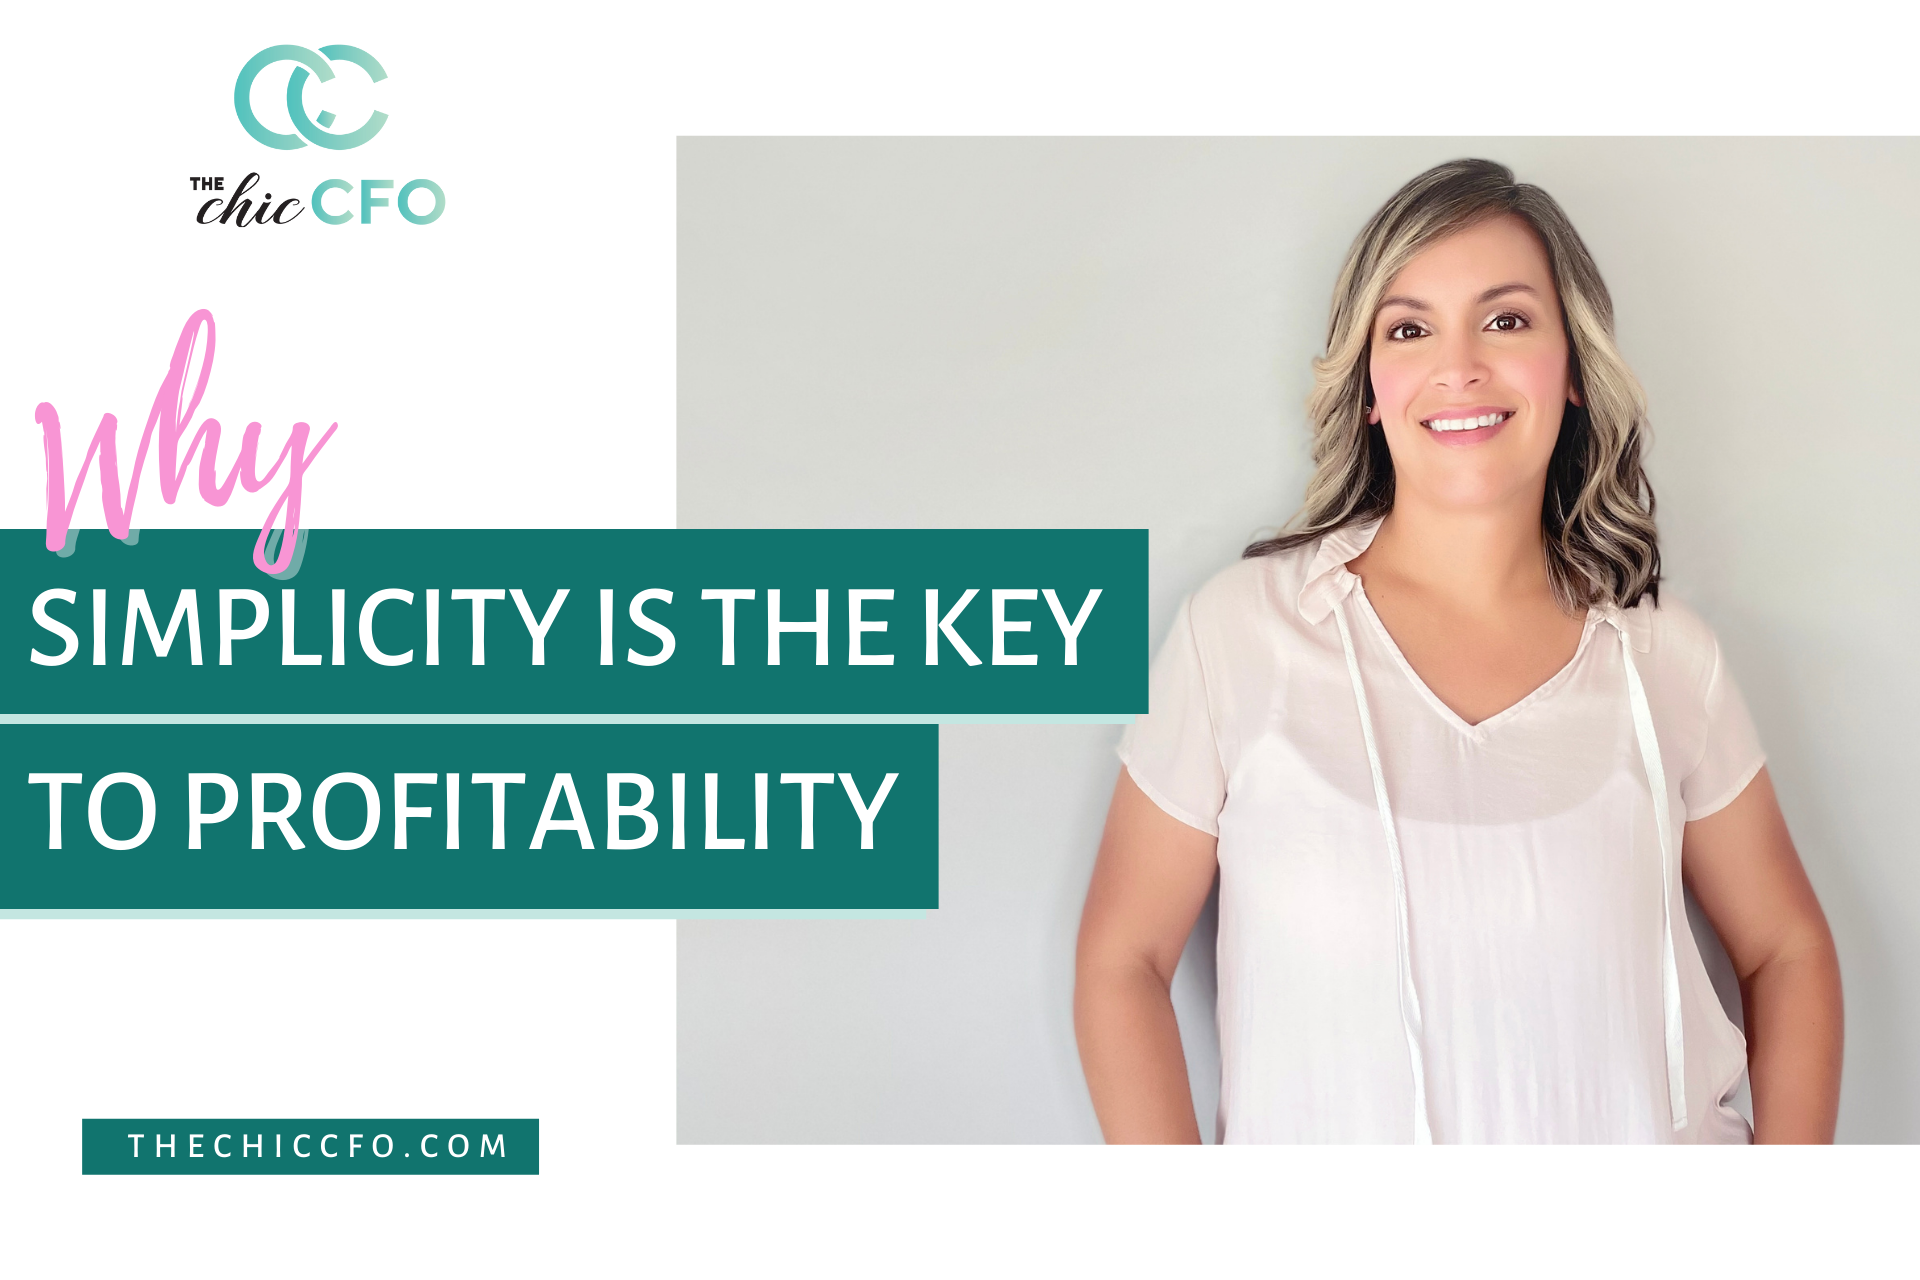 Why Simplicity is the Key to Profitability